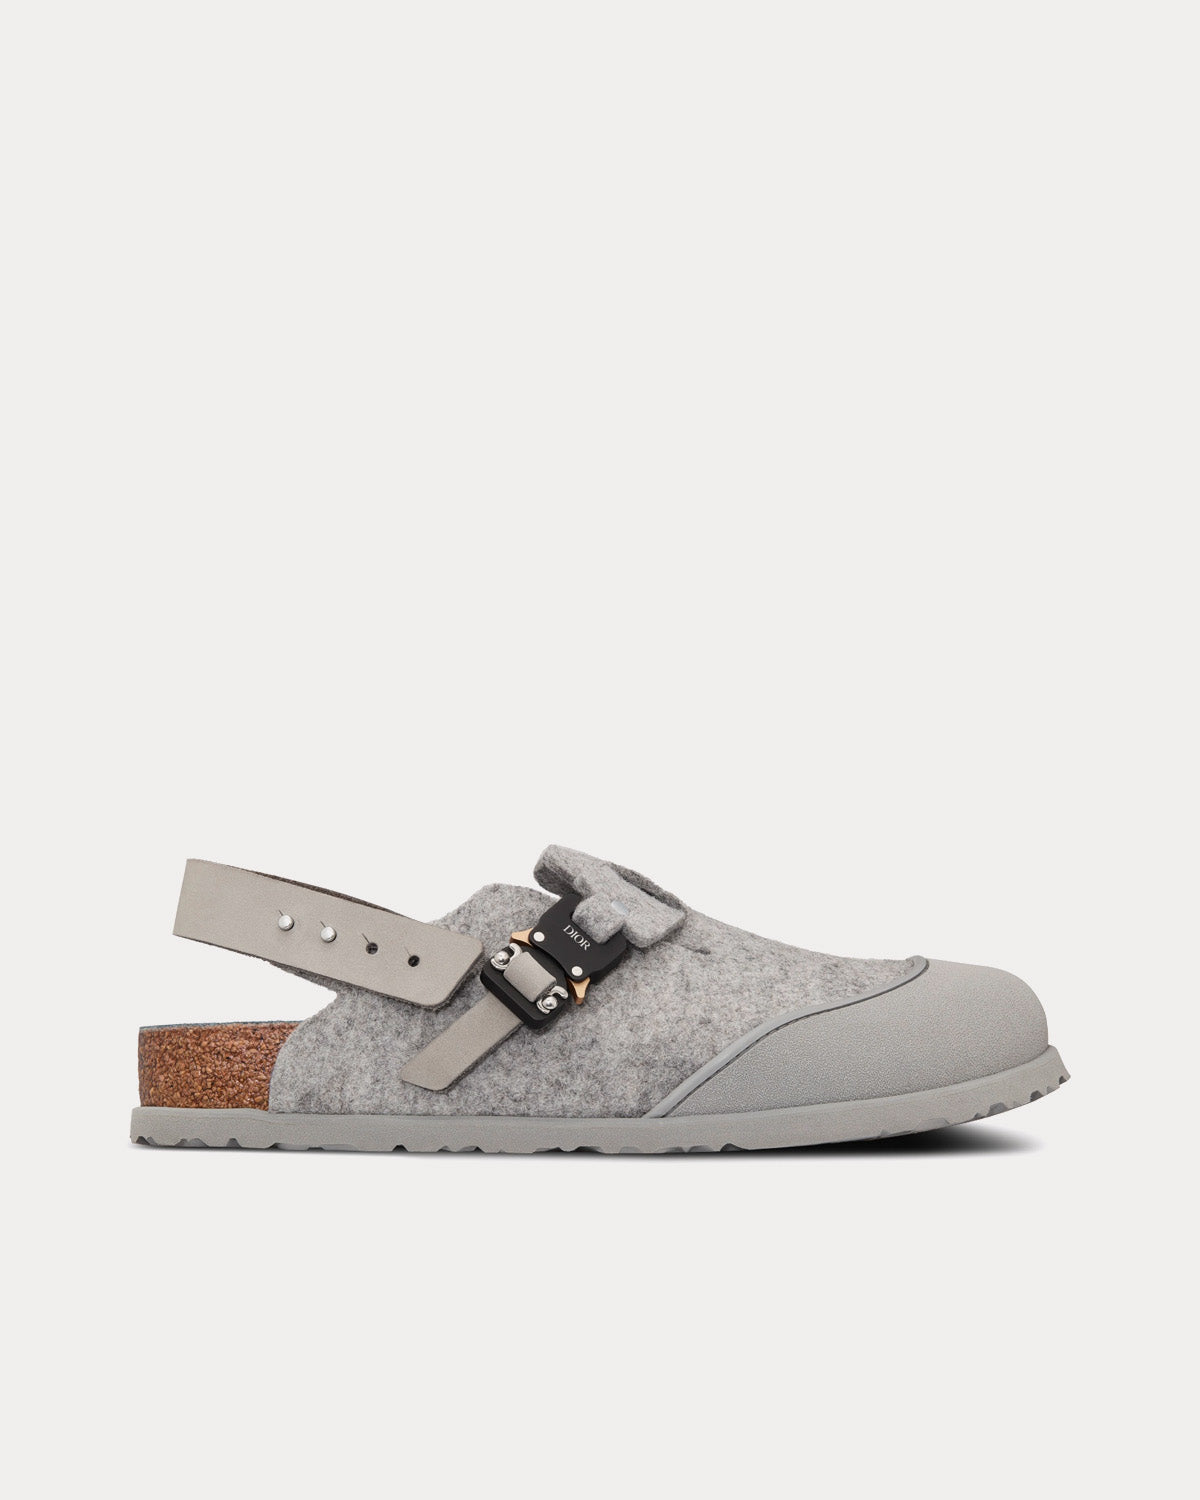 Dior x Birkenstock Tokio Dior Gray Felted Wool Embroidered with 